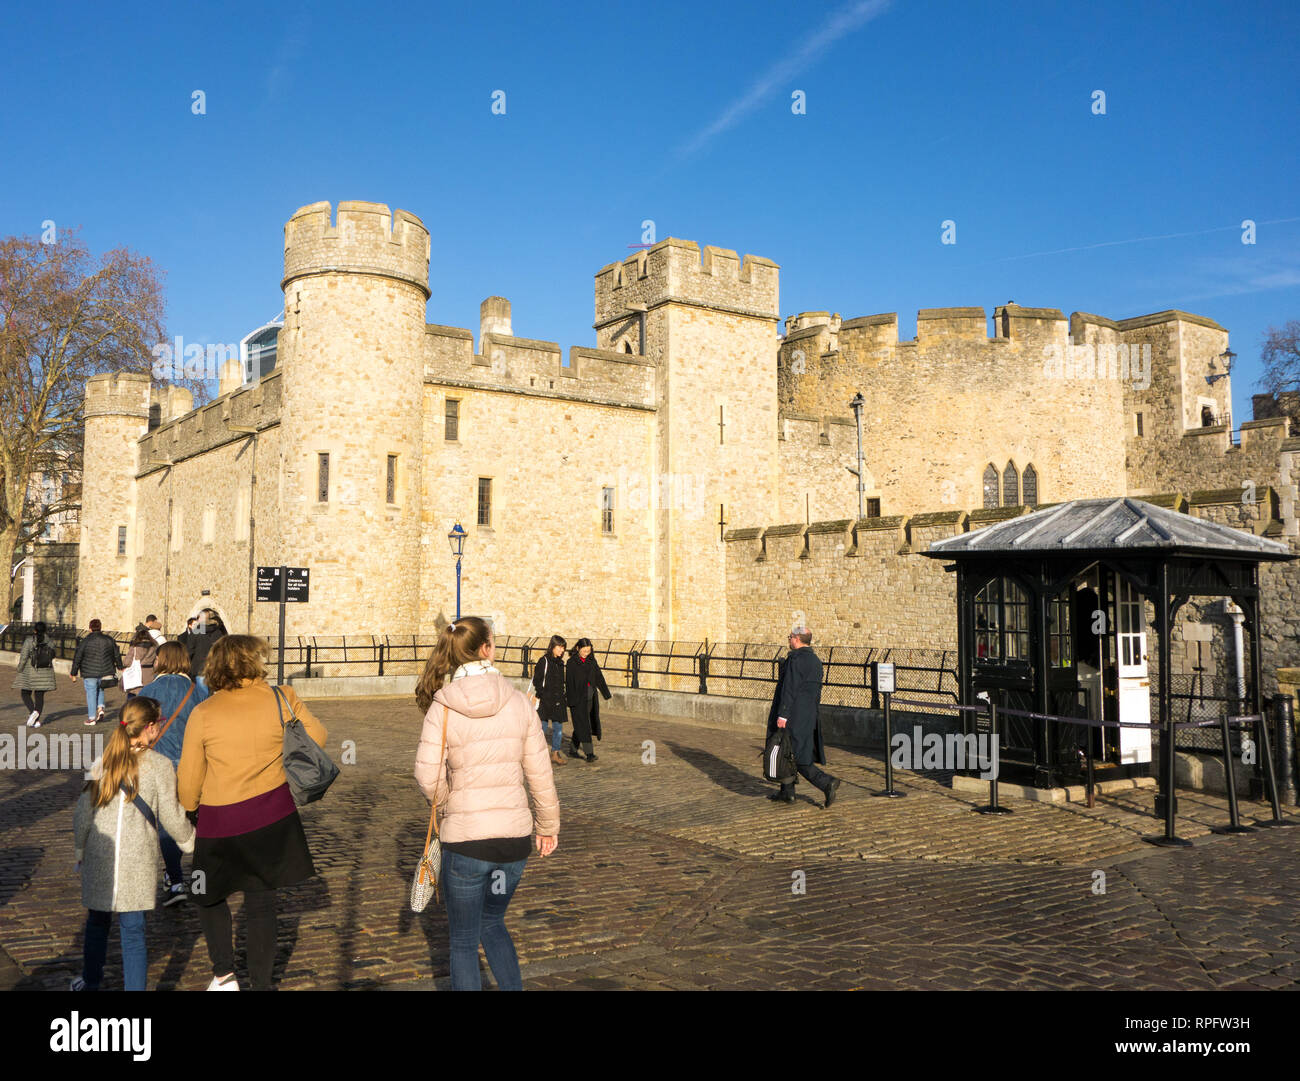 The famous London landmark  the Tower of London with blue skies with tourists people sightseers Stock Photo